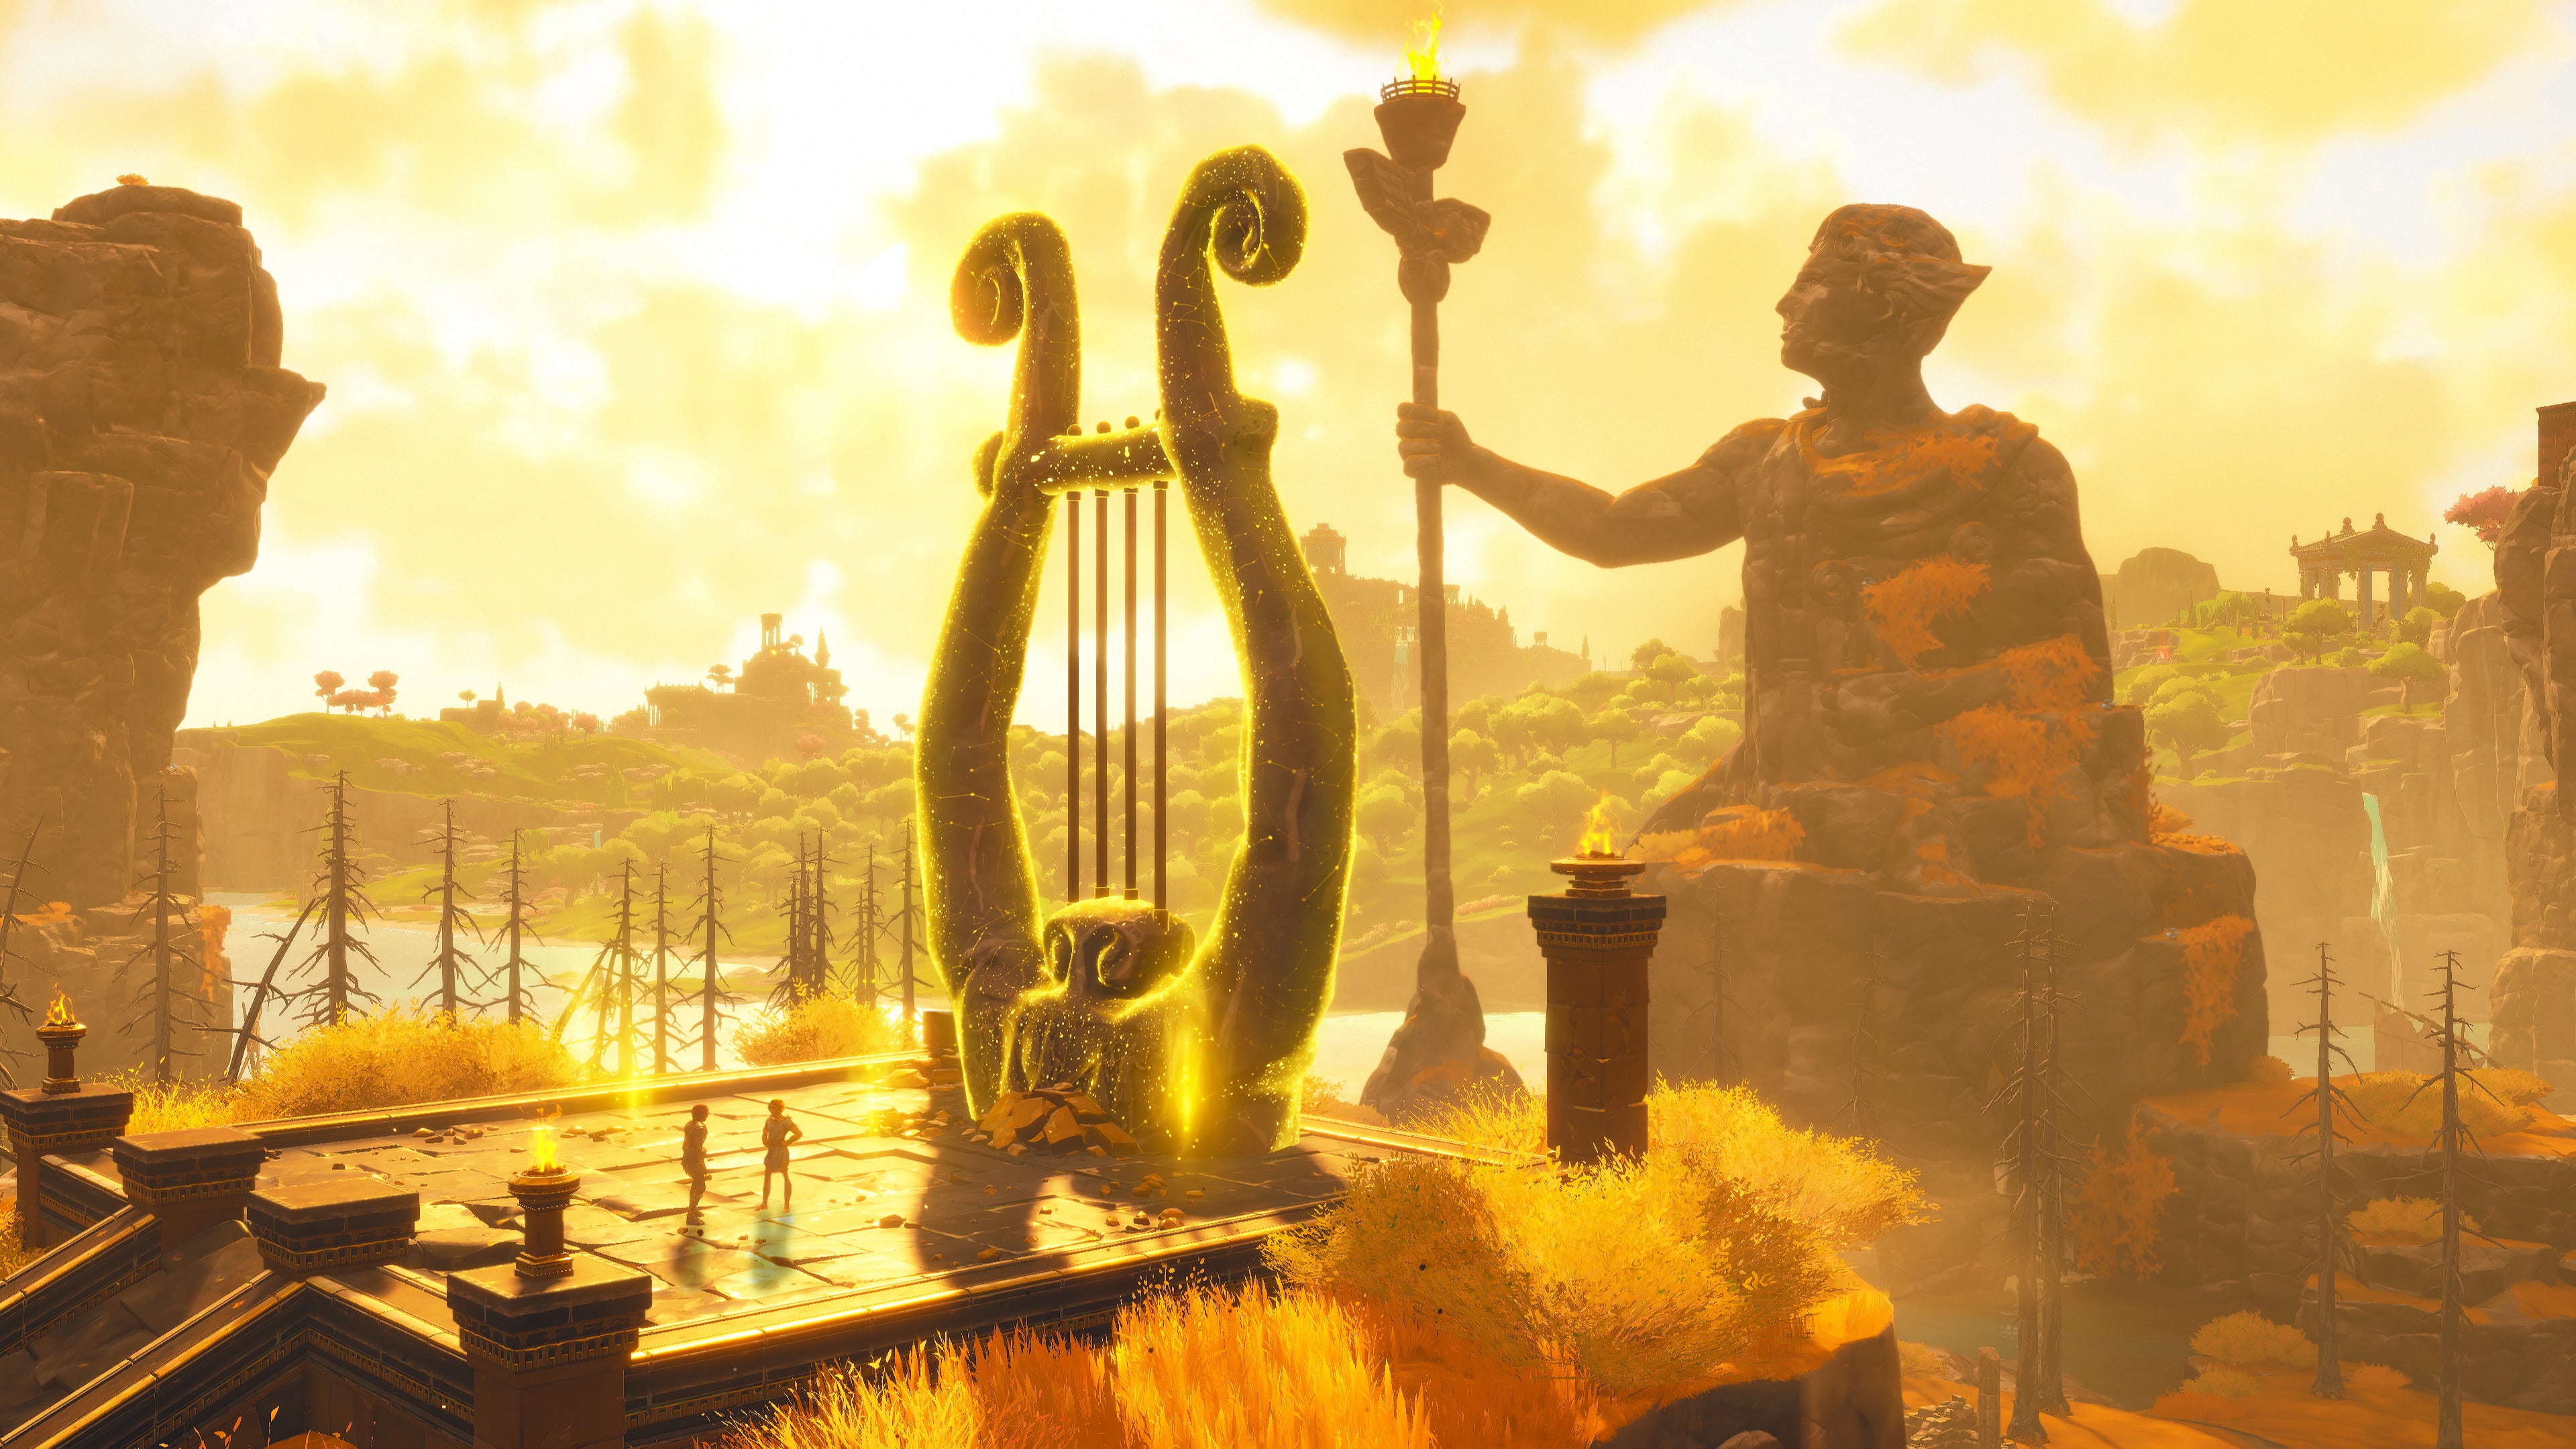 A giant harp statue in Immortals Fenyx Rising, surrounded by other humanoid statues.